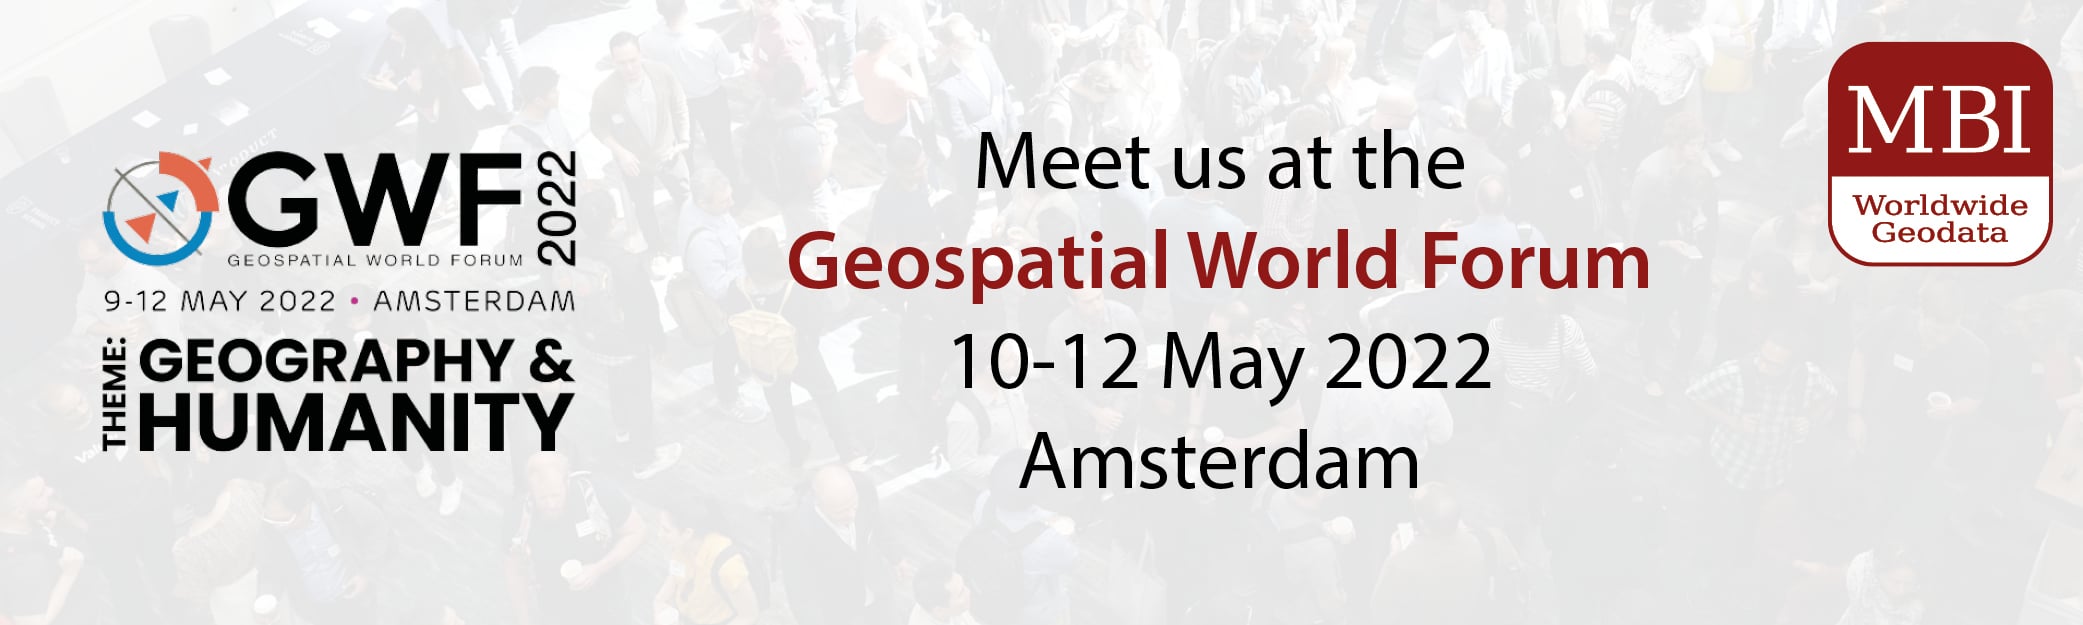 Event Banner for the Geospatial World Forum in Amsterdam 2022